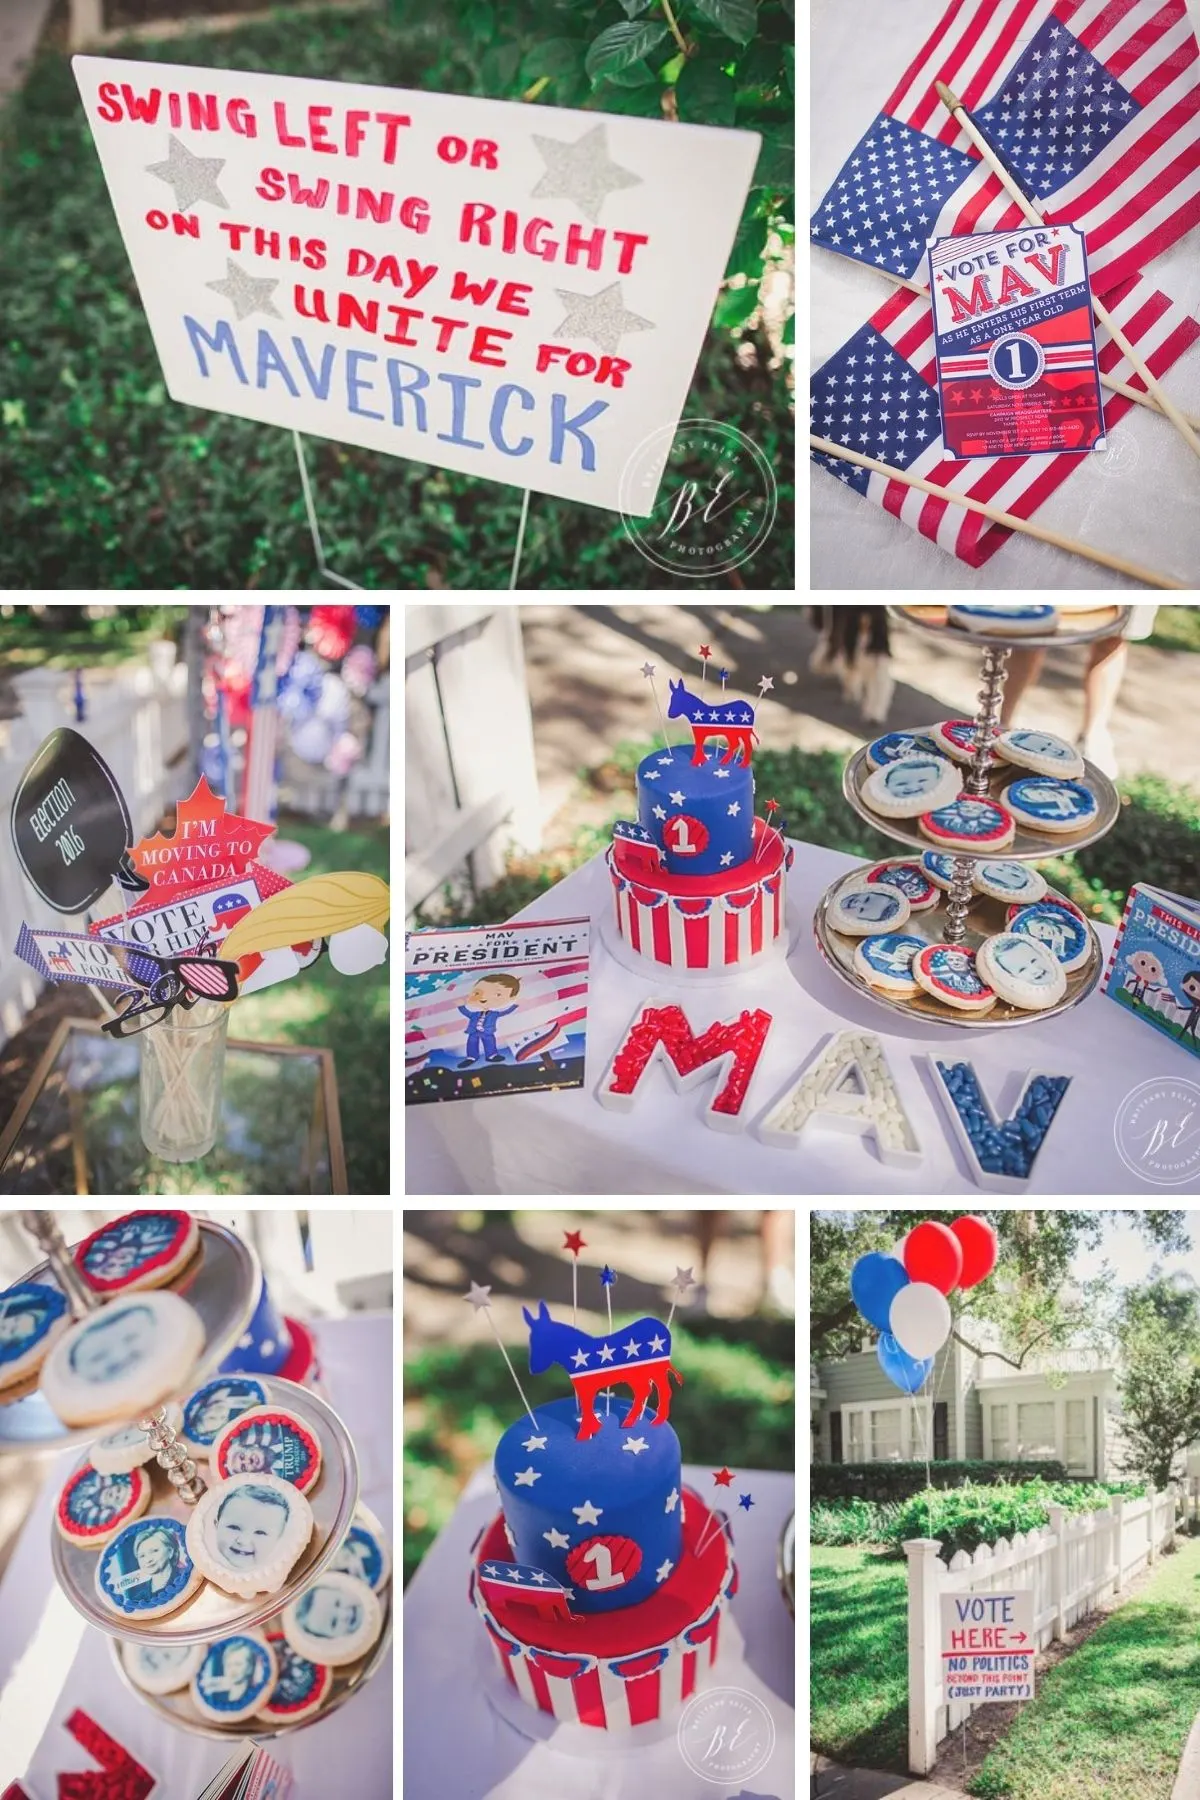 Photo collage for baby for president party theme including cakes, party signs, and American flags.